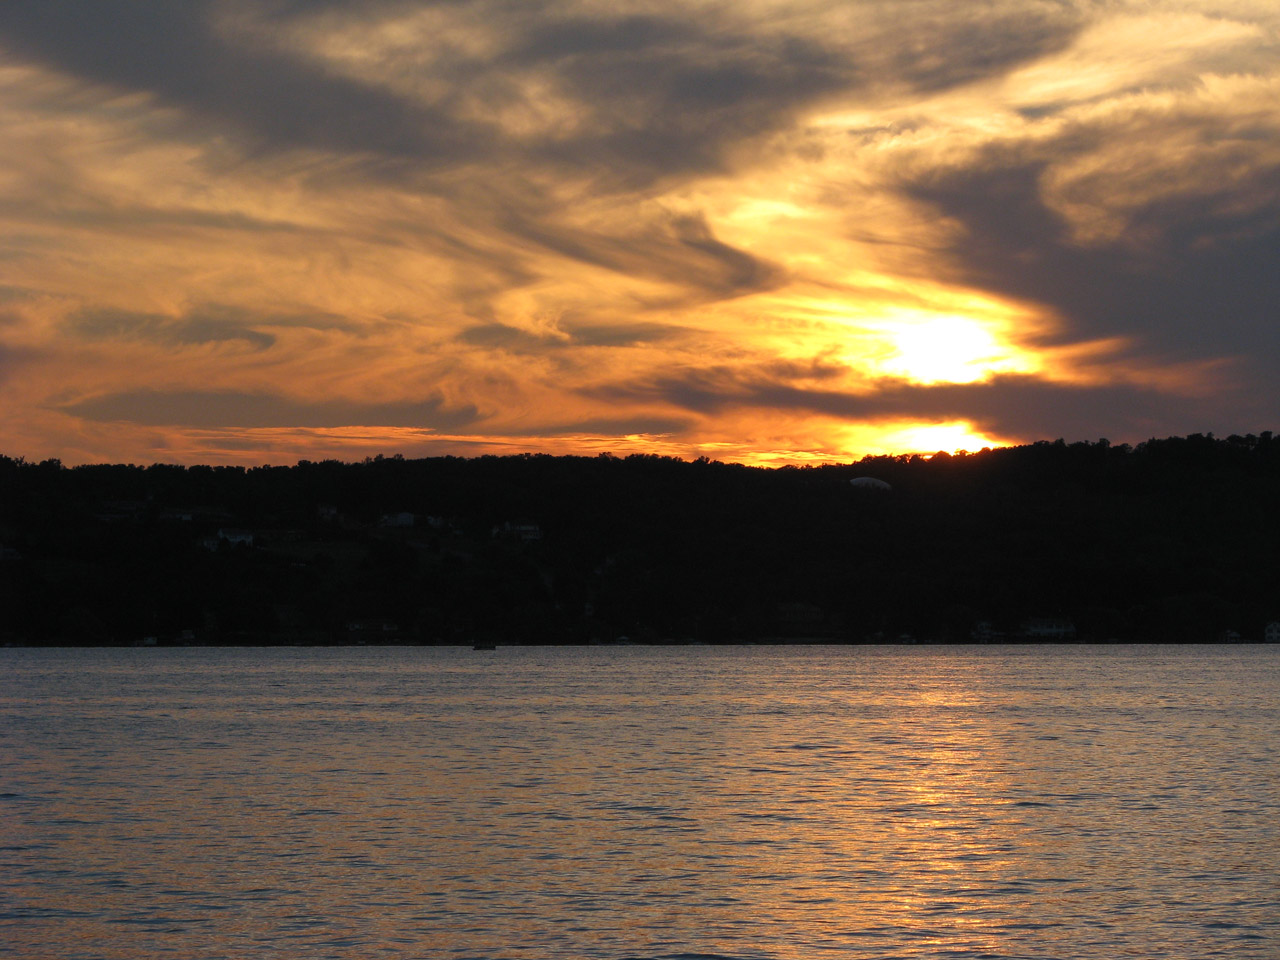 Sun setting over the Finger Lakes in Upstate New York